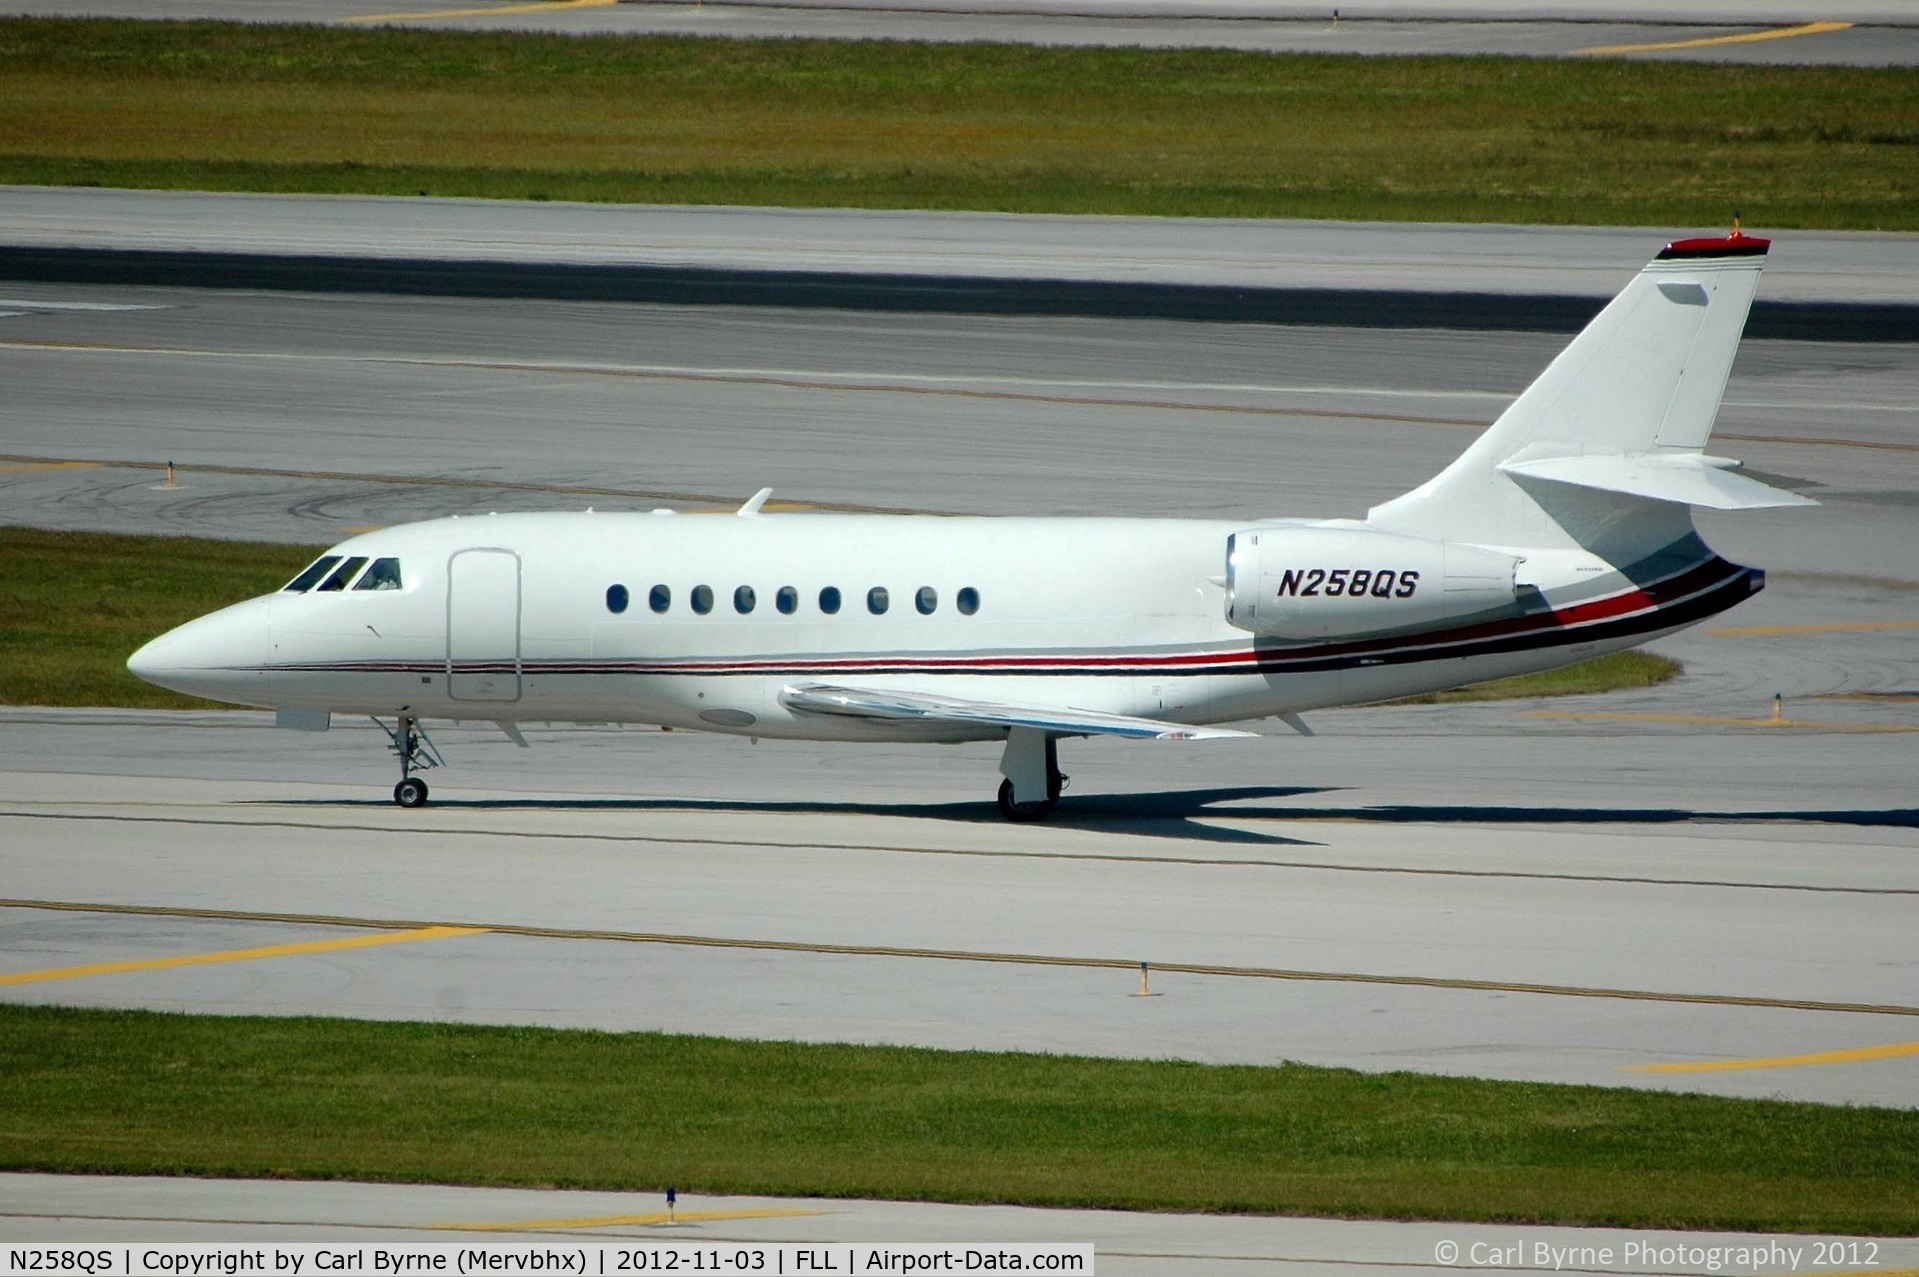 N258QS, 2001 Dassault Falcon 2000 C/N 158, Taken from the Hibiscus car park viewing area.